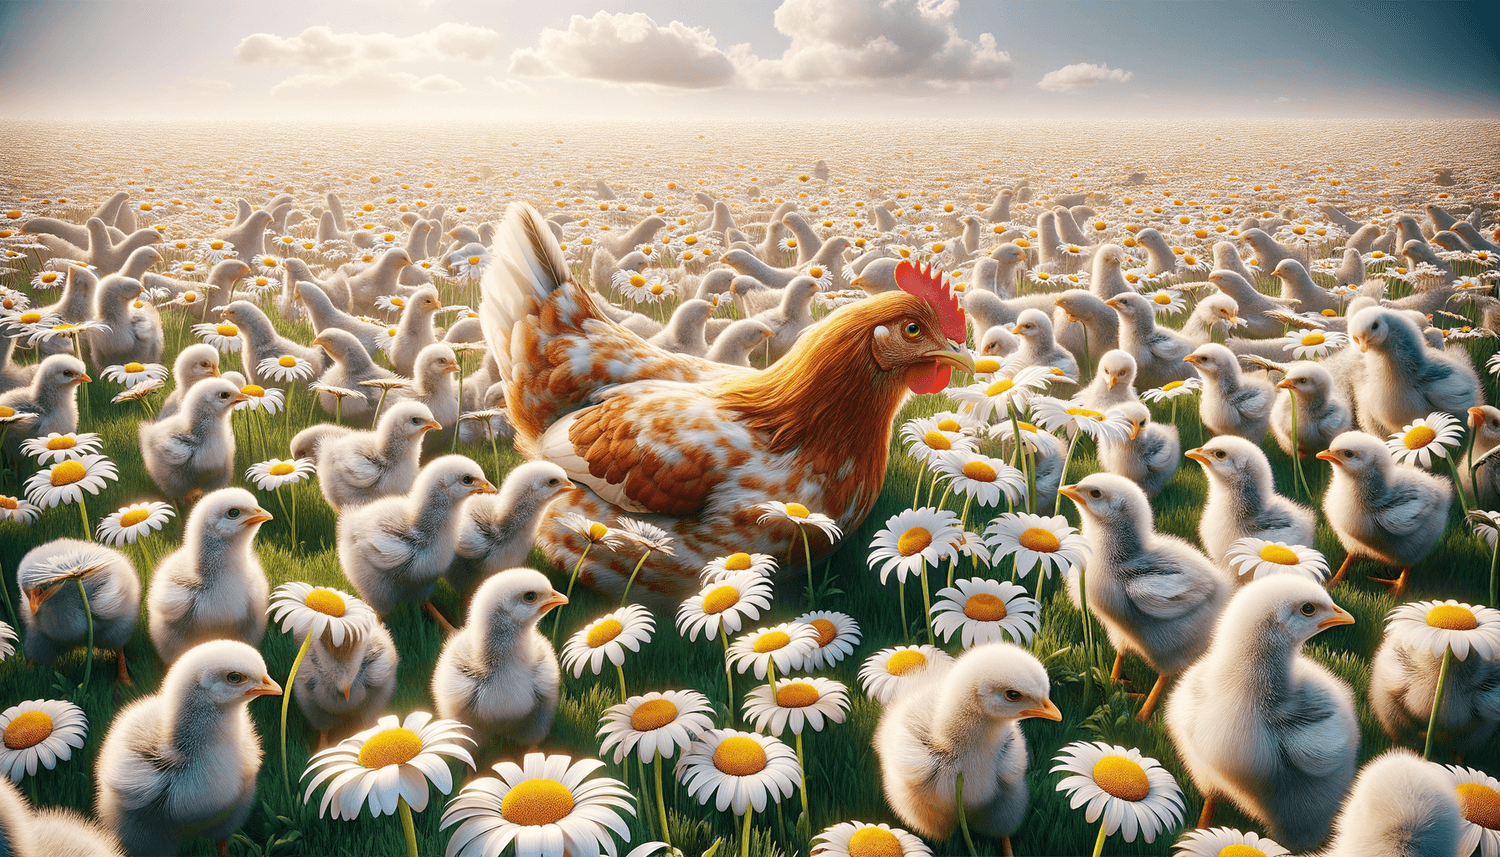 Can Chickens Eat Daisies?